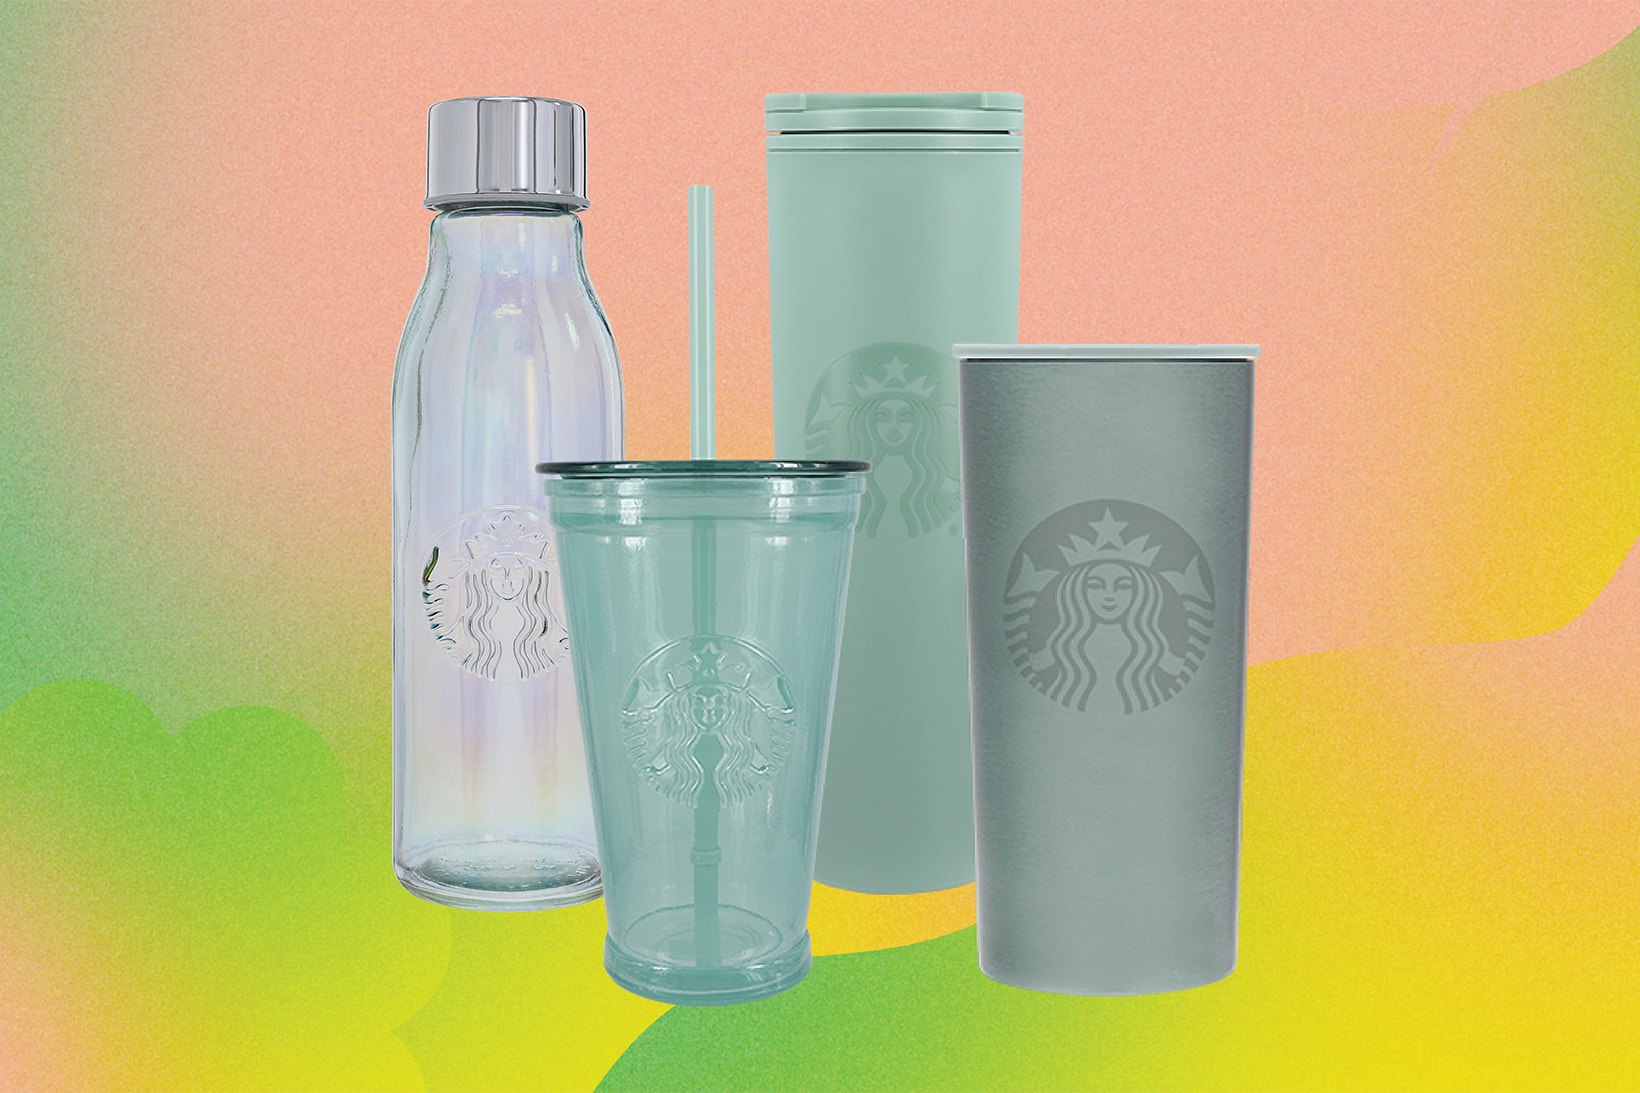 Starbucks Recycled Collection Tumblers Bottles and Reusable Cups 